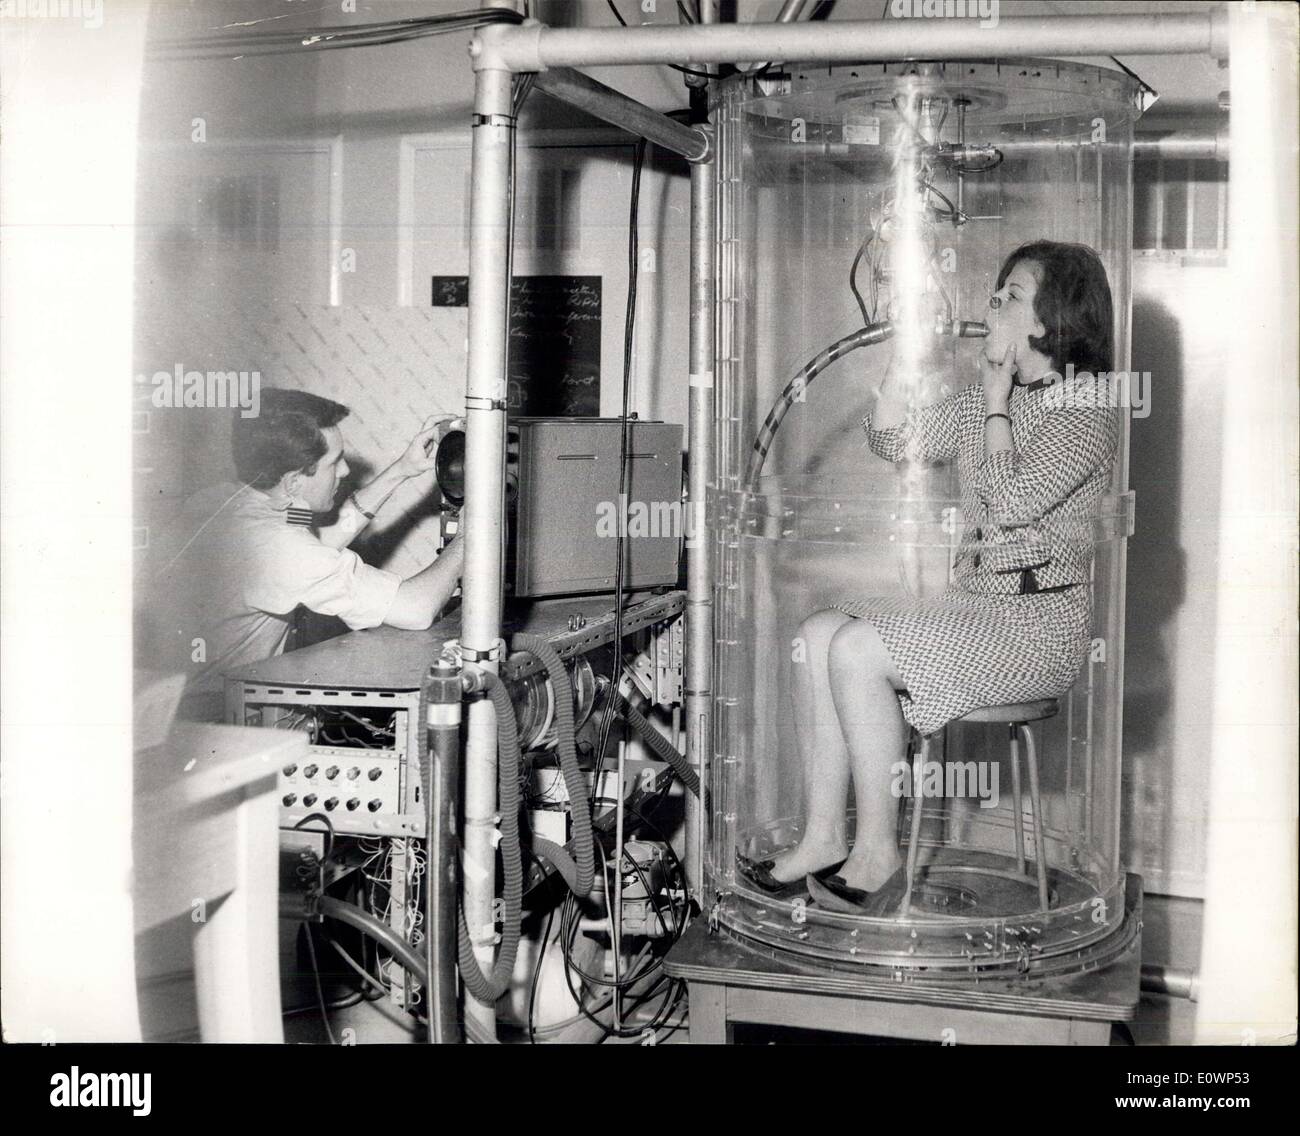 Oct. 30, 1963 - R.A.F Institute of Aviation Medicine:A visit has been held to the Royal Air Force Institute of Aviation Medicine at Farnborough. Photo shows Inside the perspex tube taking a body plethysmograph for high altitude tests is 19-year-old Maryan Baker, a scientific assistant. The device allows measurement of the resistance of air flow into and out of the lungs, of the volume of gas in the lungs, and of the flood of blood through the lungs. Stock Photo